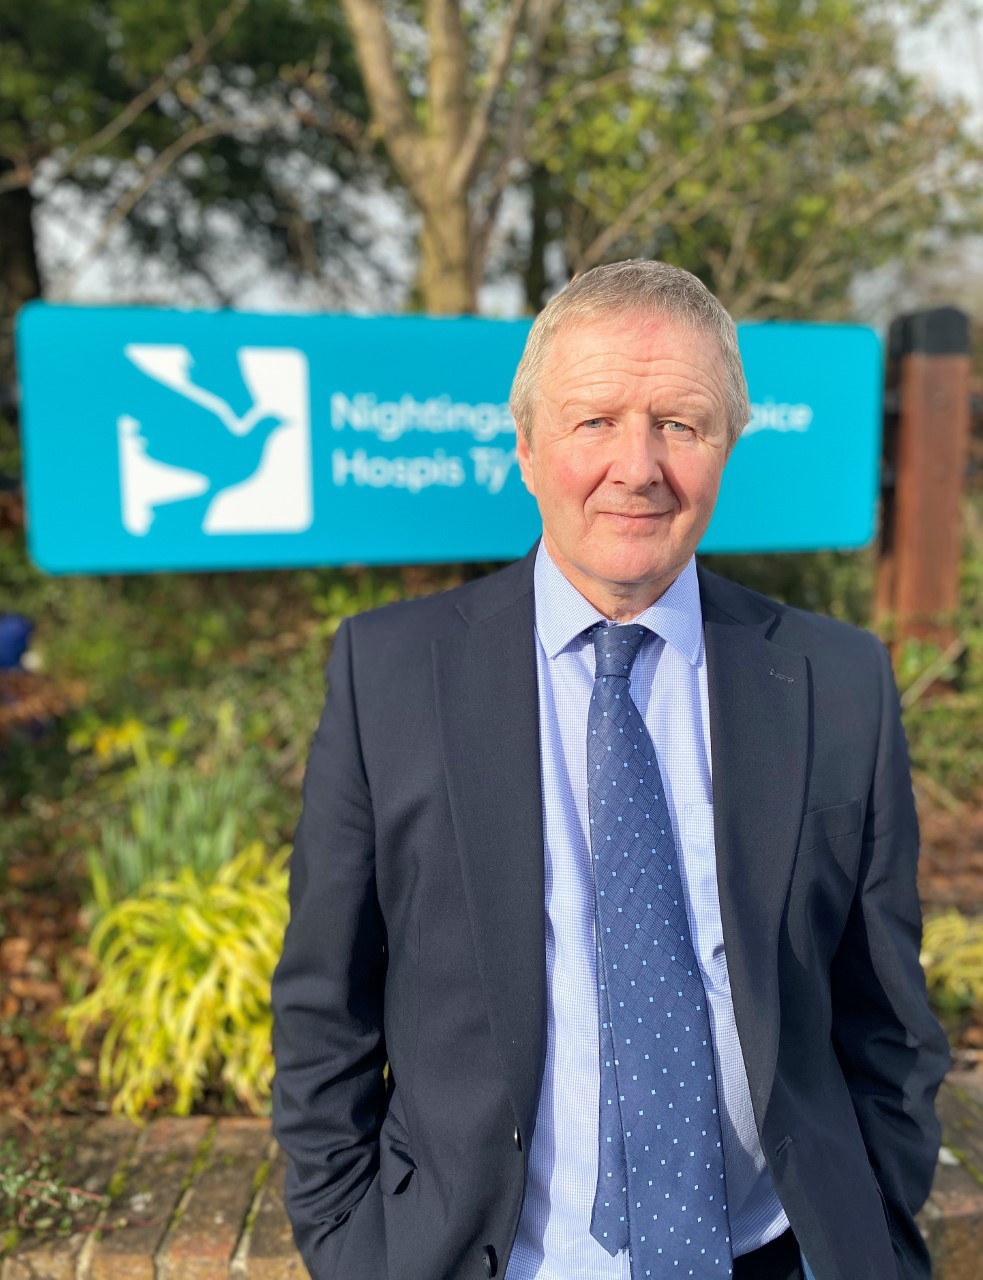 Steve Parry, chief executive of Nightingale House Hospice.